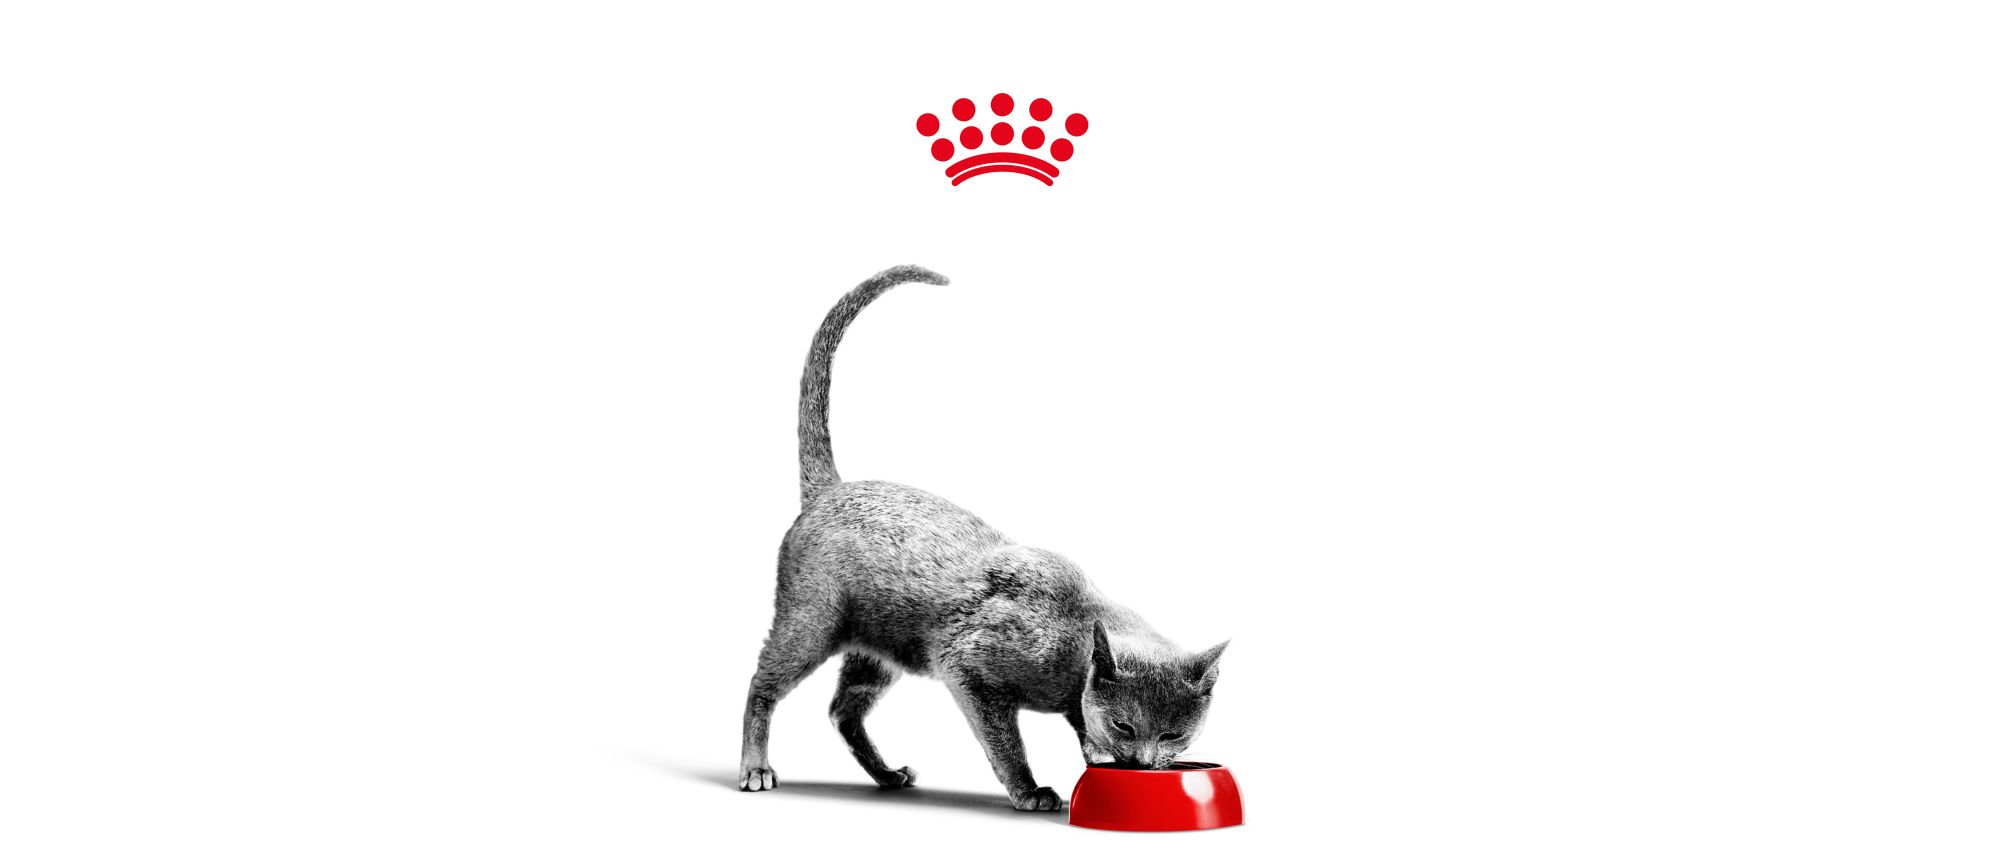 the cat eats from a red bowl